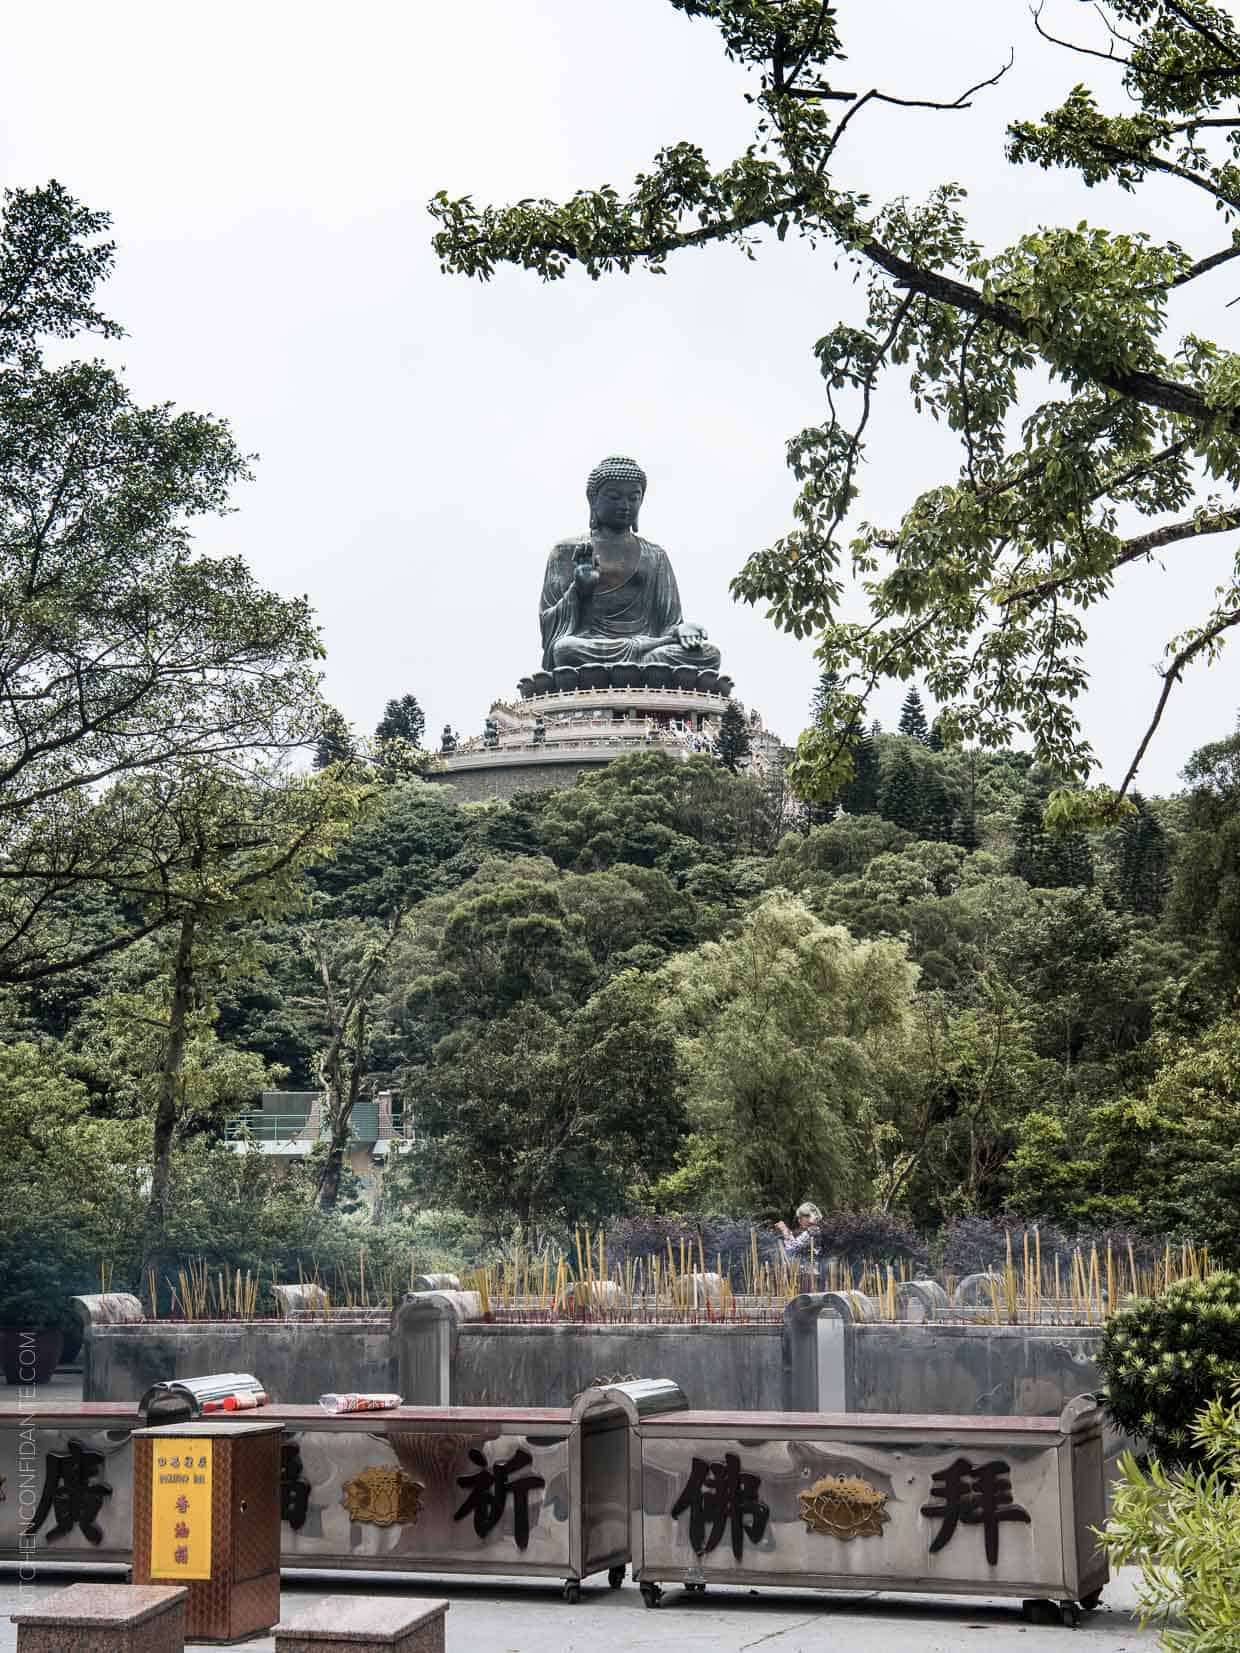 A picture of The Big Buddha taken from the Po Lin Monastery.